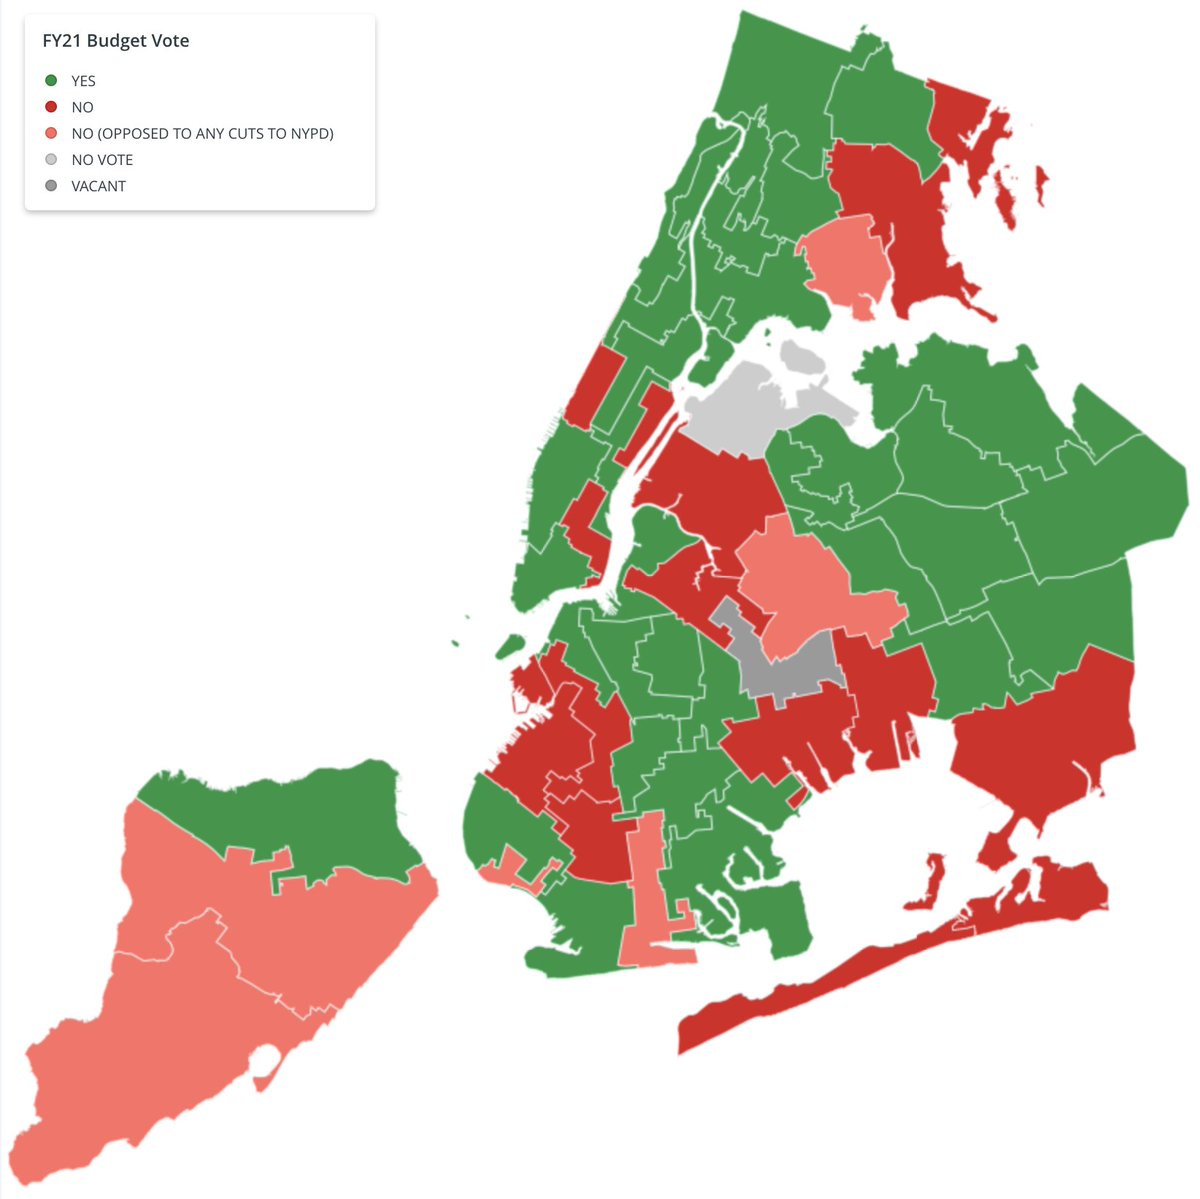 How did your @NYCCouncil member vote on the NYC budget? #NYCBudgetJustice #DefundNYPD

Voting data via @changethenypd and @ShantRS 

chrisalensula.carto.com/builder/e7c3fe…